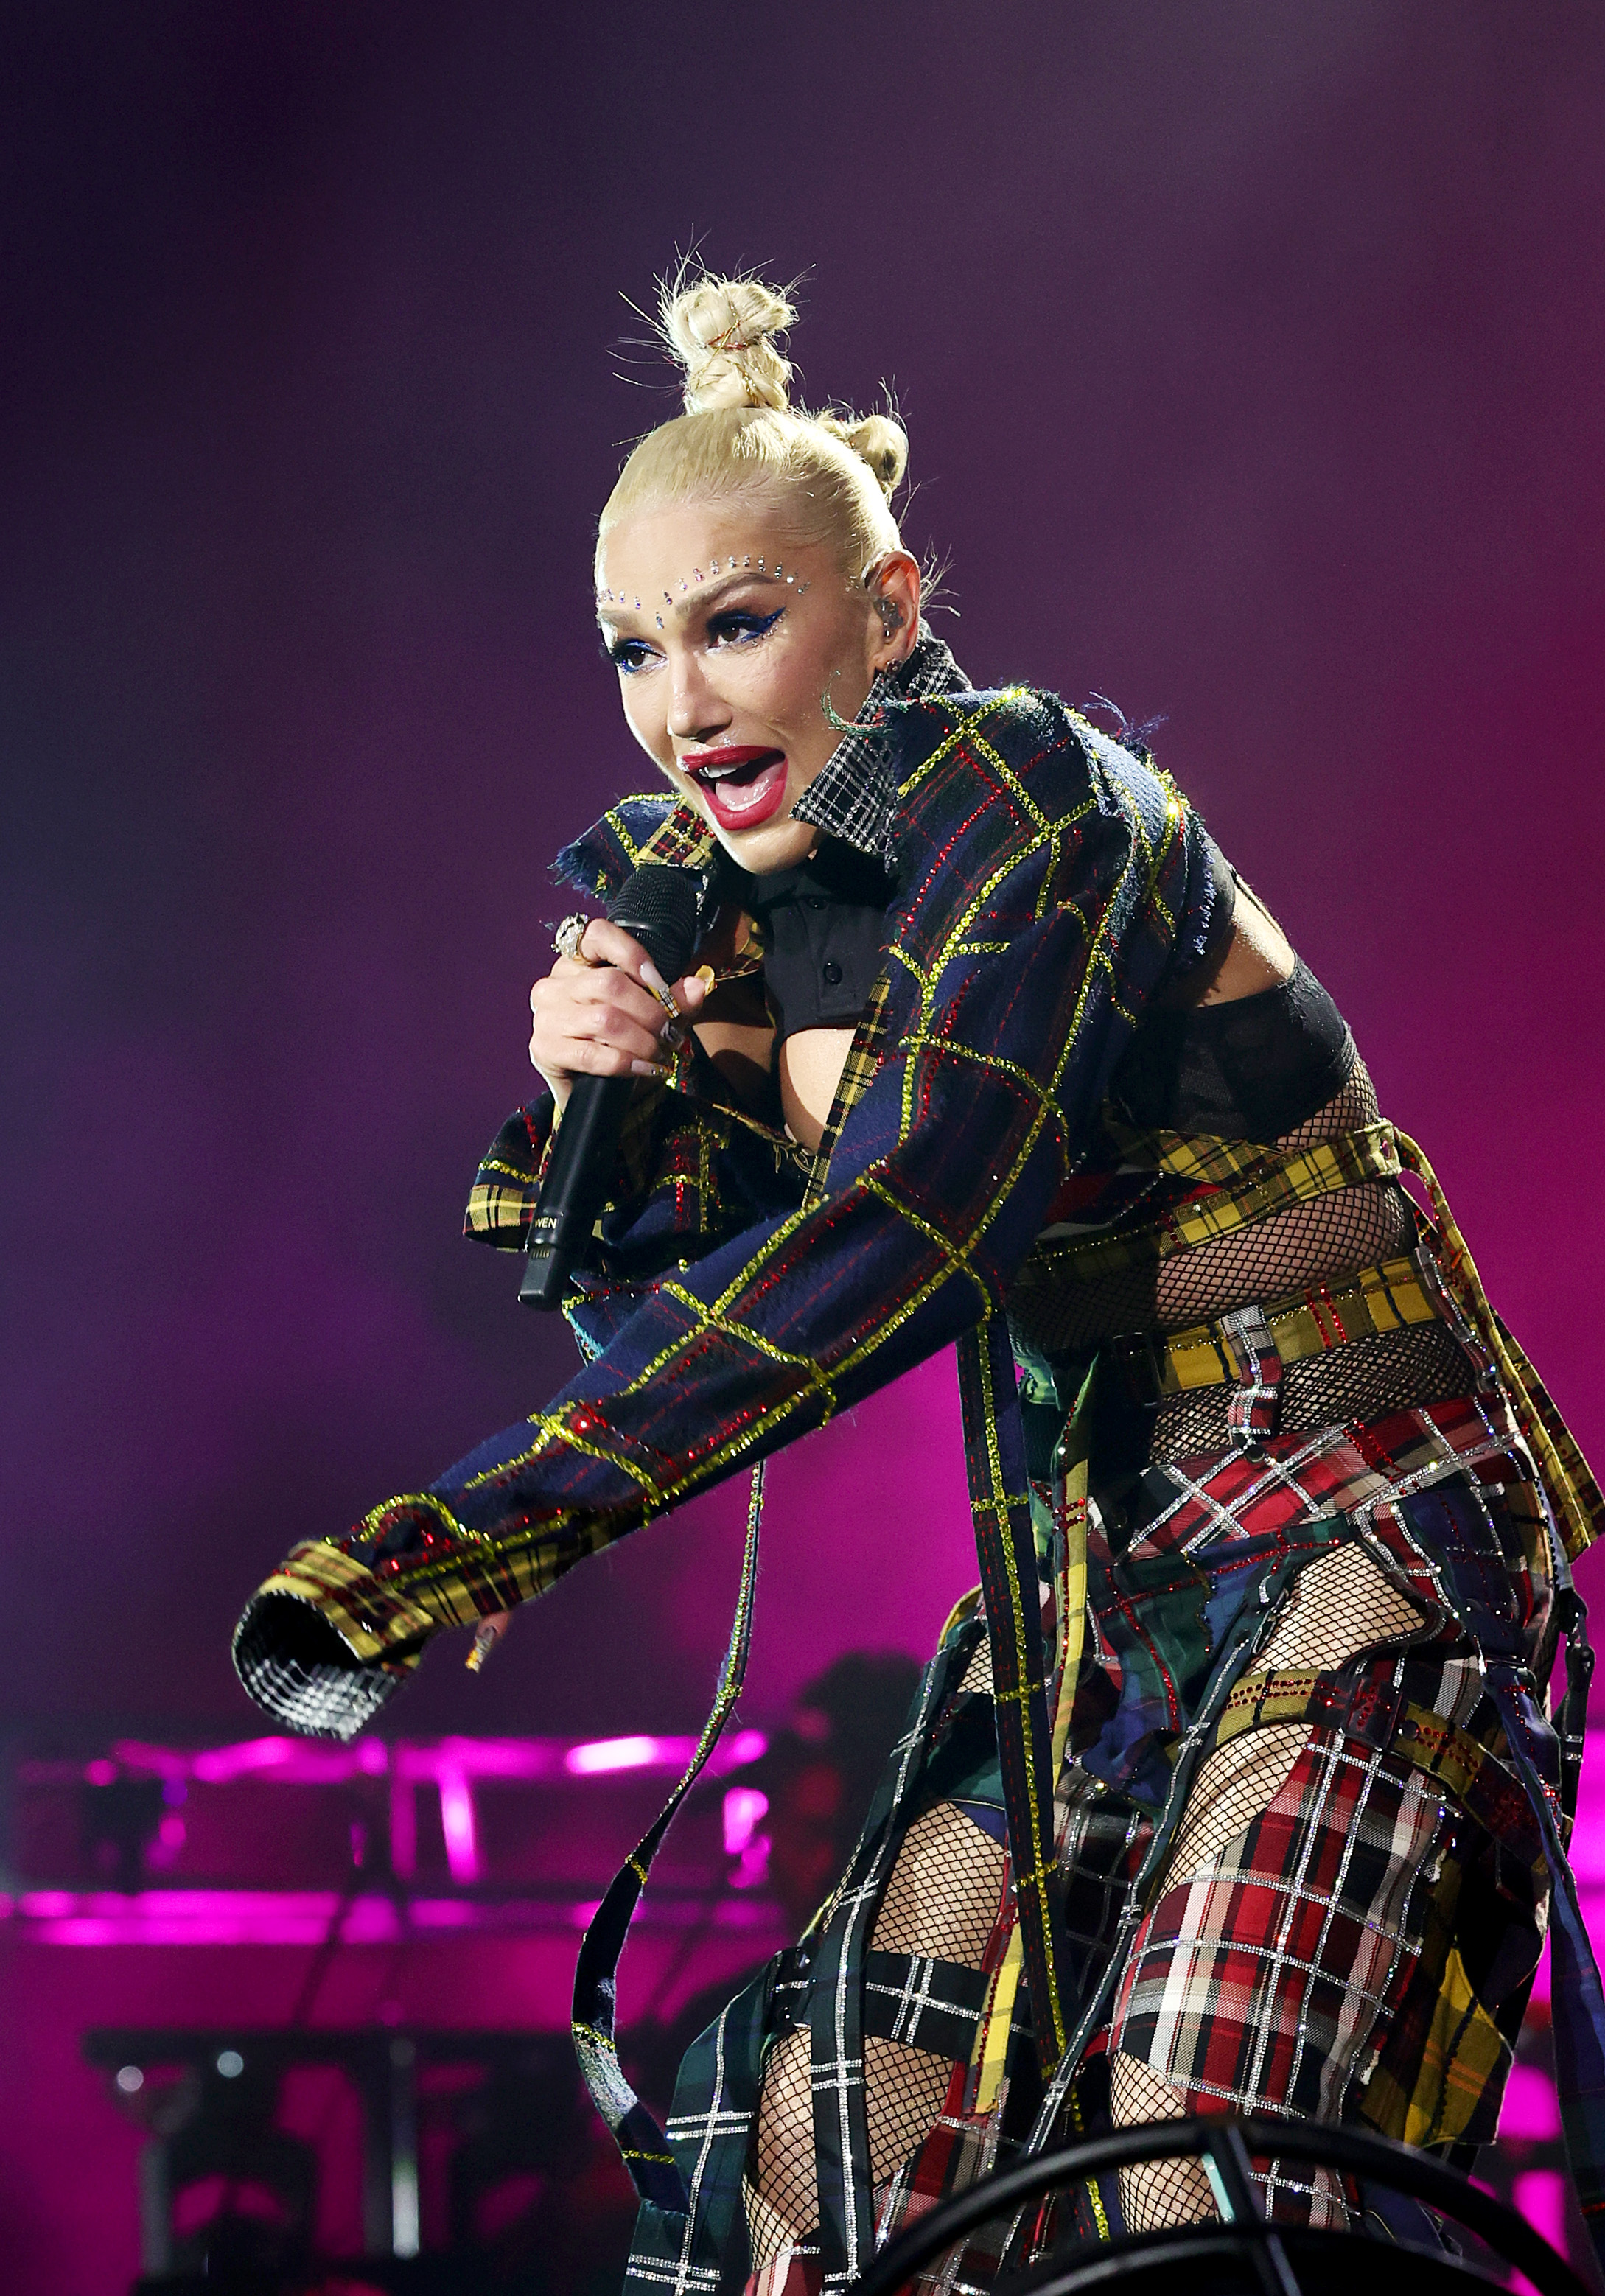 Gwen reunited with her old band, No Doubt, over the weekend to perform at Coachella music festival